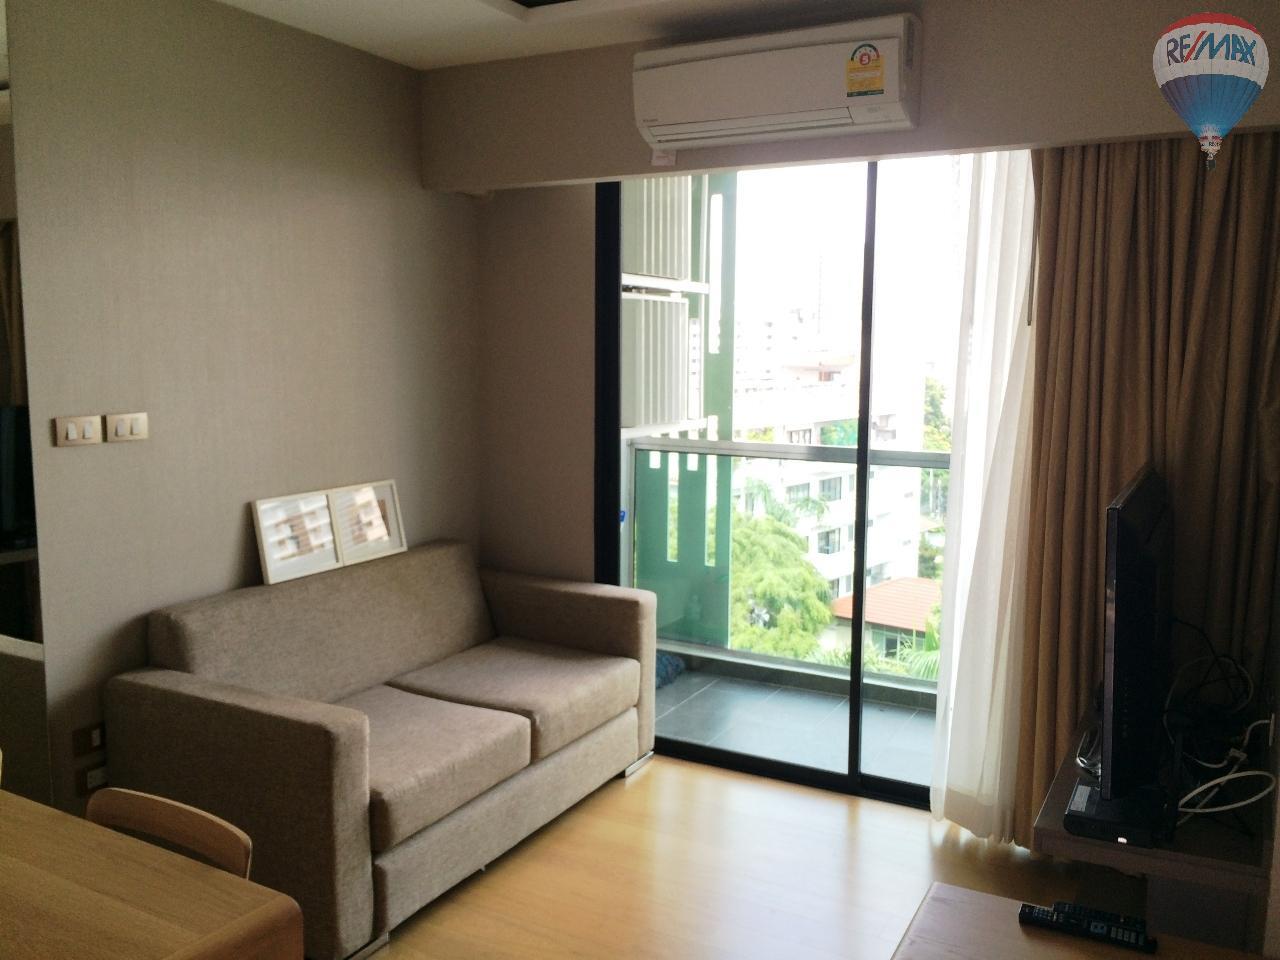 RE/MAX Properties Agency's Condo for RENT 1B/1B near BTS Thong Lo, 38 sq.m., top floor 7